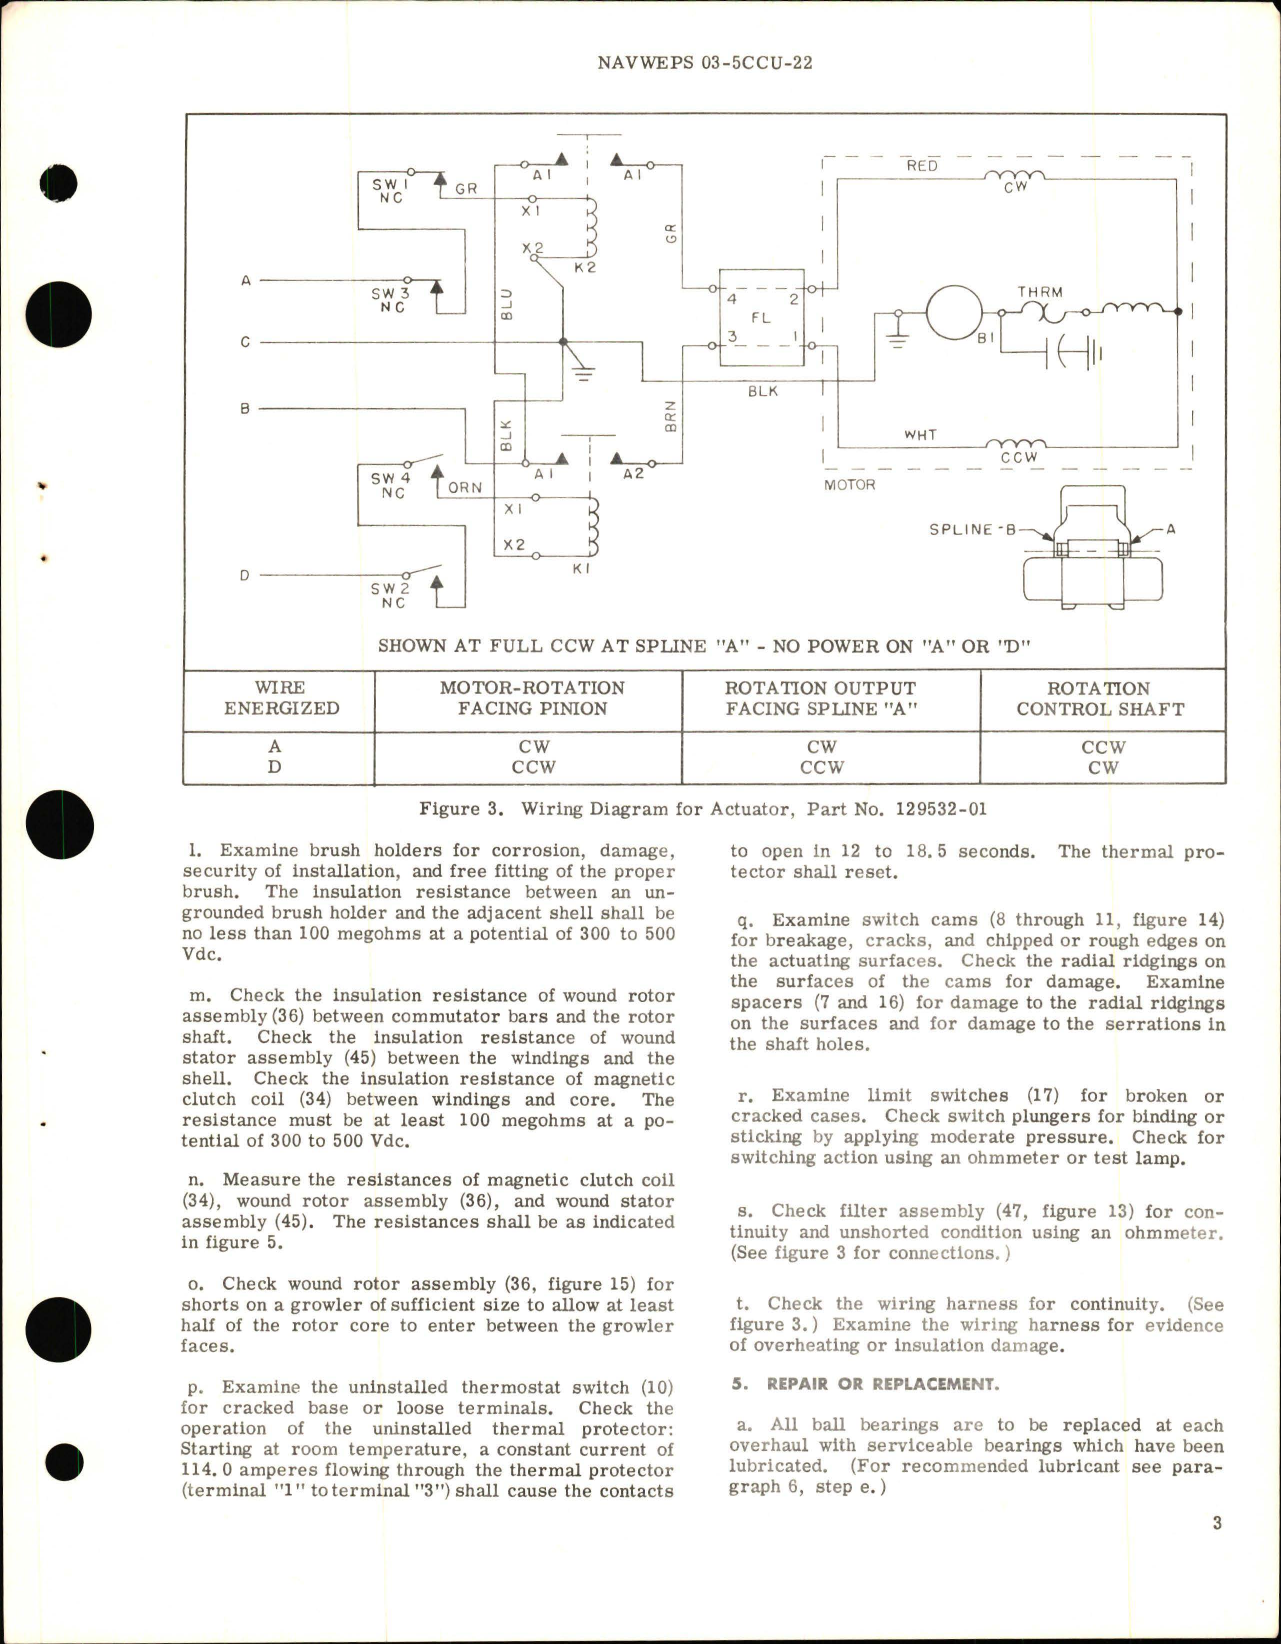 Sample page 5 from AirCorps Library document: Overhaul Instructions with Parts Breakdown for Actuator Motor - Parts 129532-01 and 129532-03 